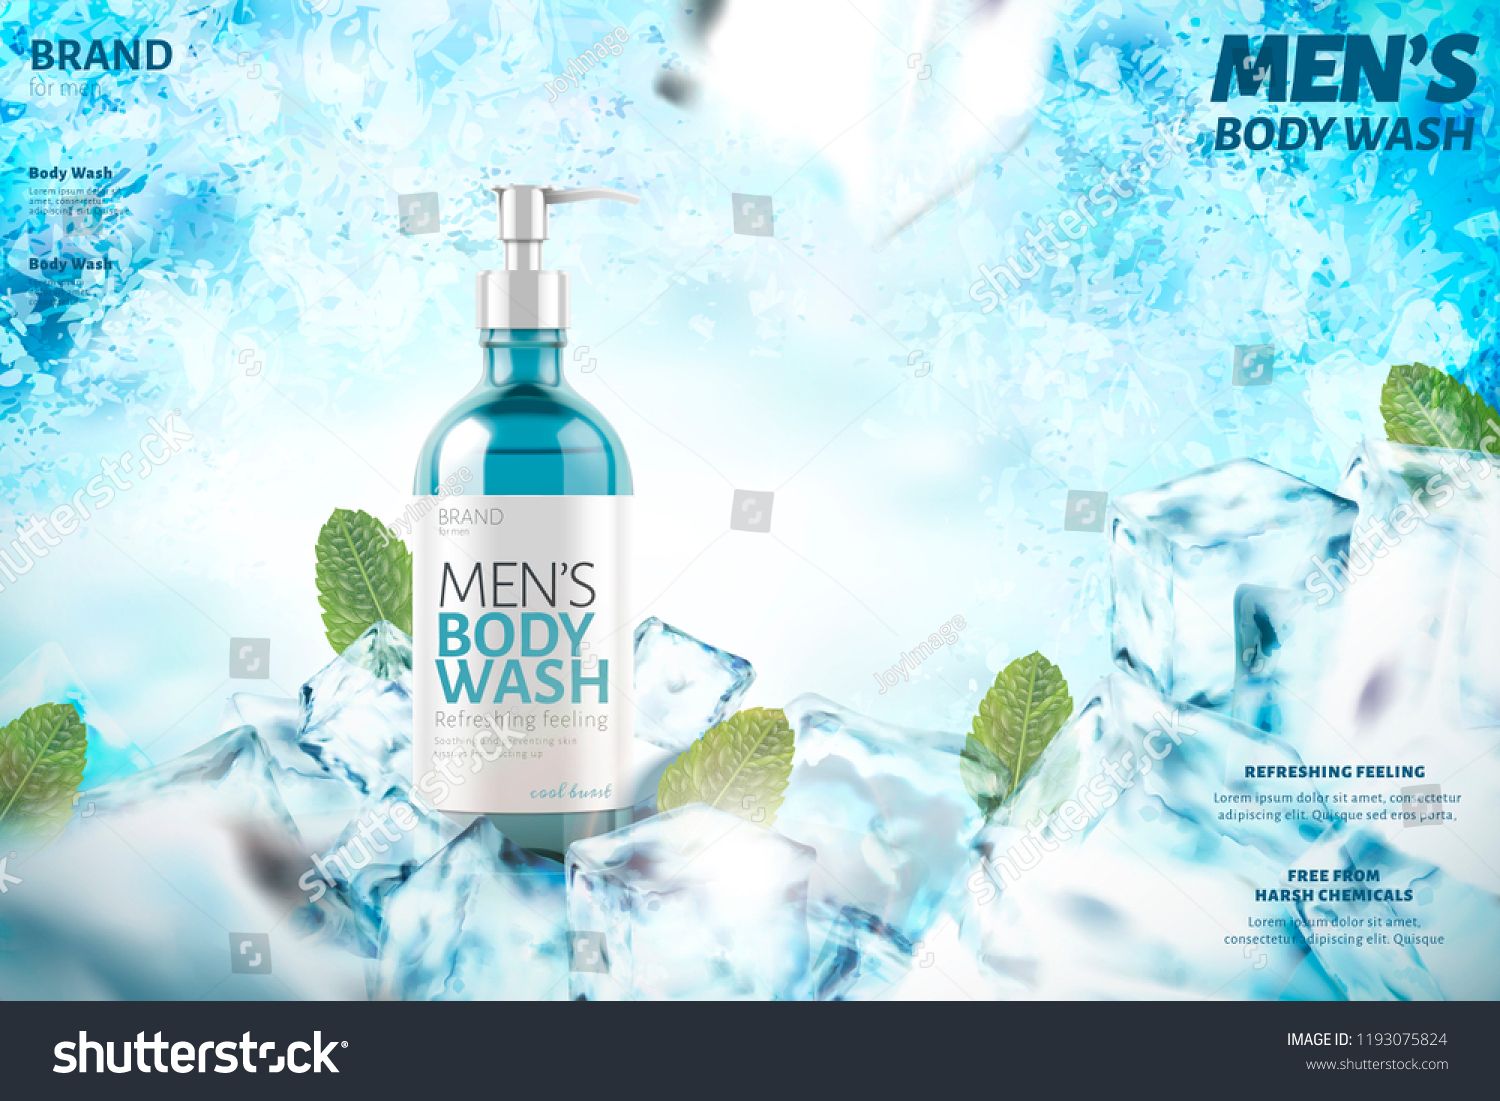 Cooling Men S Body Wash With Mint Leaves 3d Illustration On